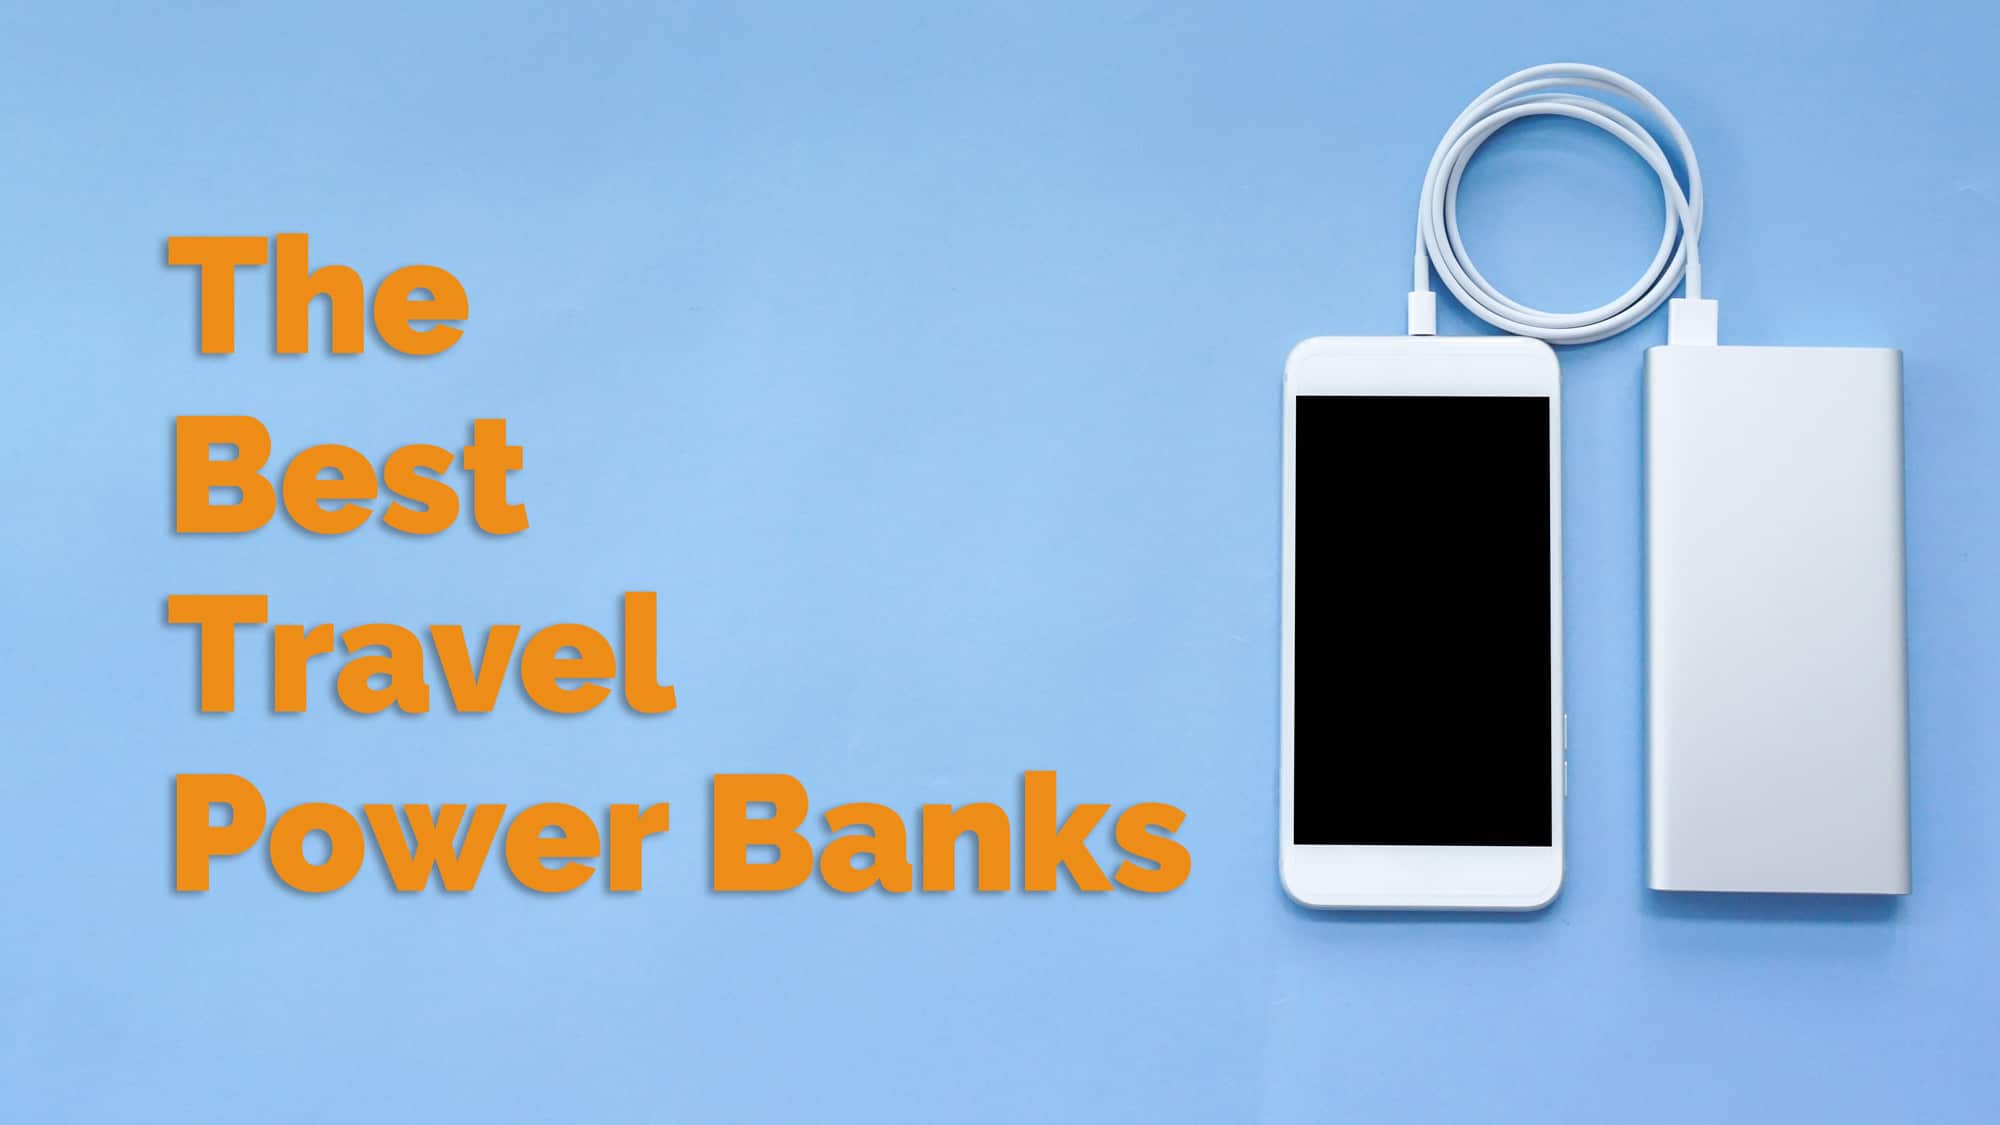 8 Best Travel Power Banks | Portable Charger, Battery Pack